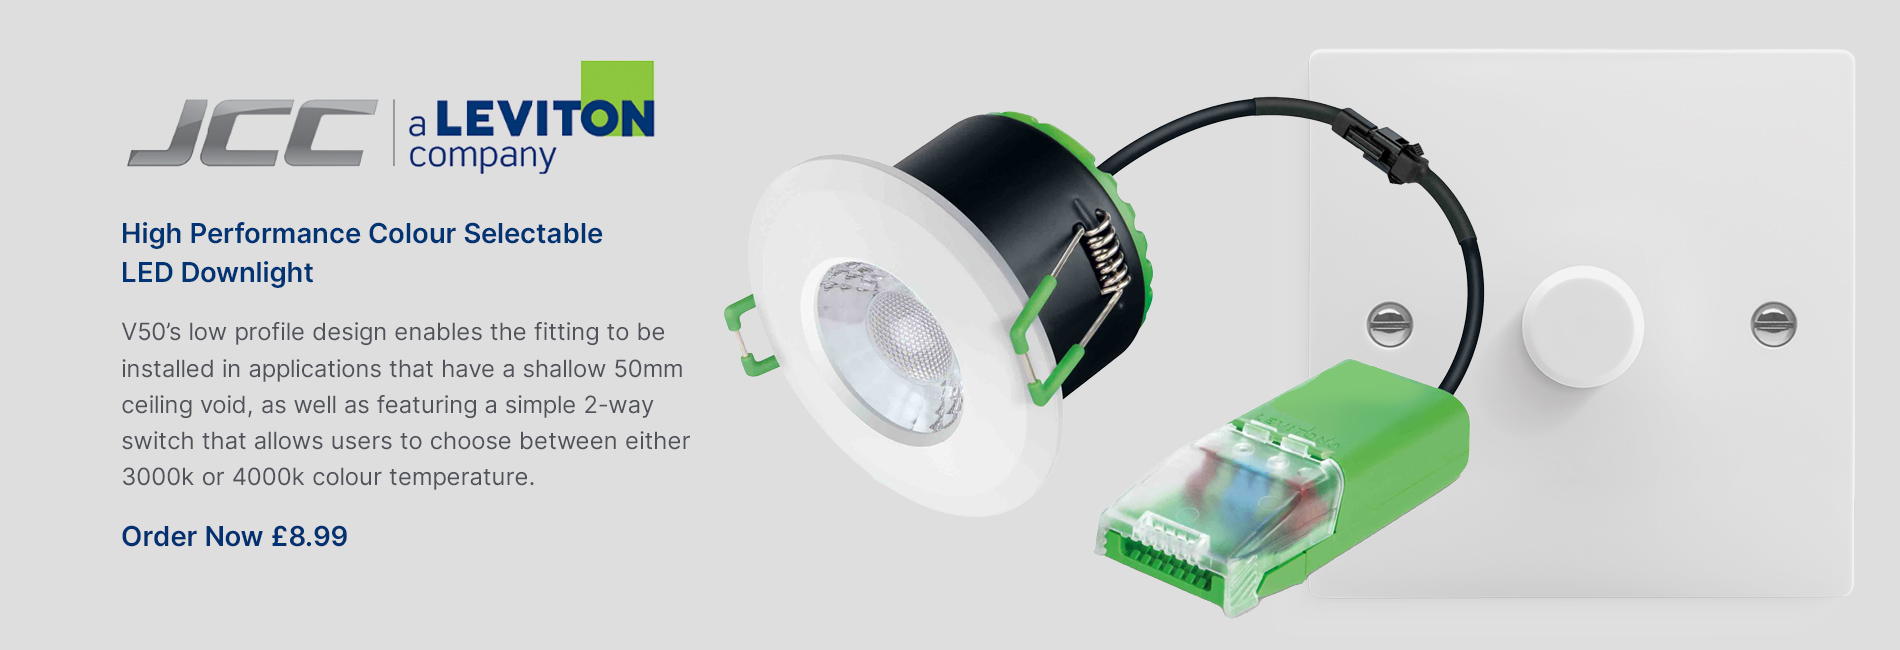 JCC - High Performance Colour Selectable LED Downlight